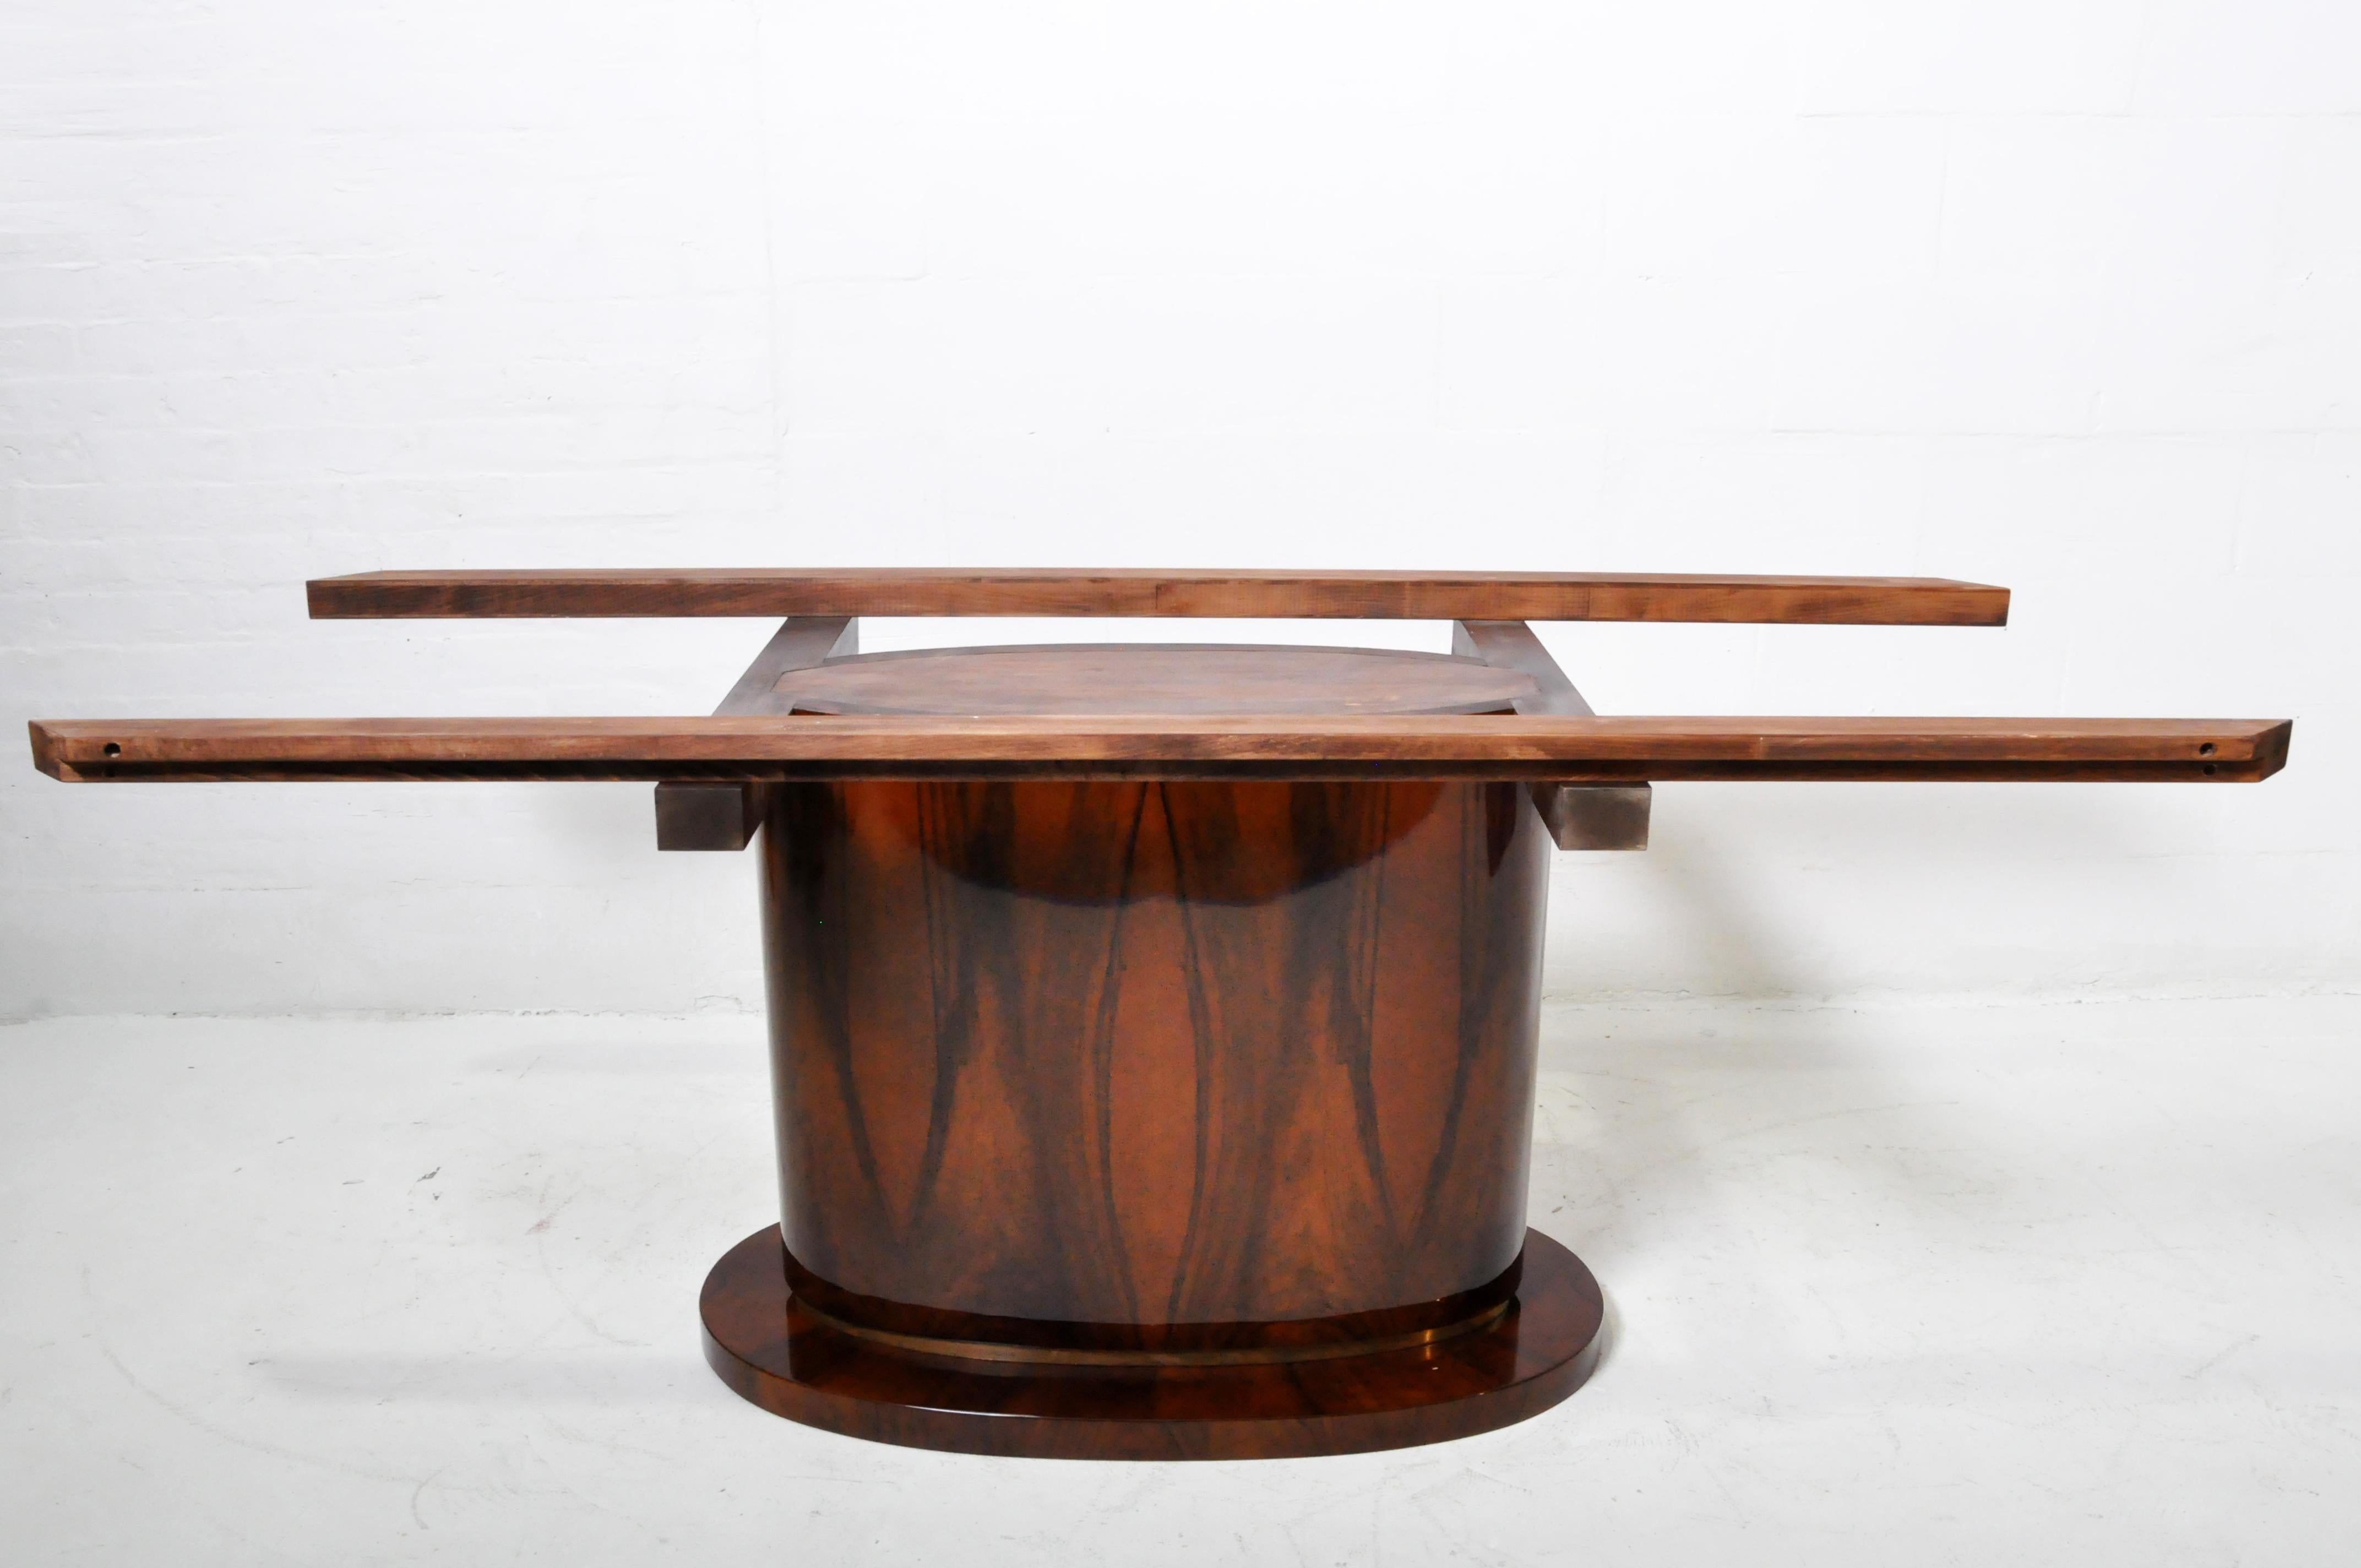 Hungarian Dining Table with Walnut Veneer and a Brass Foot